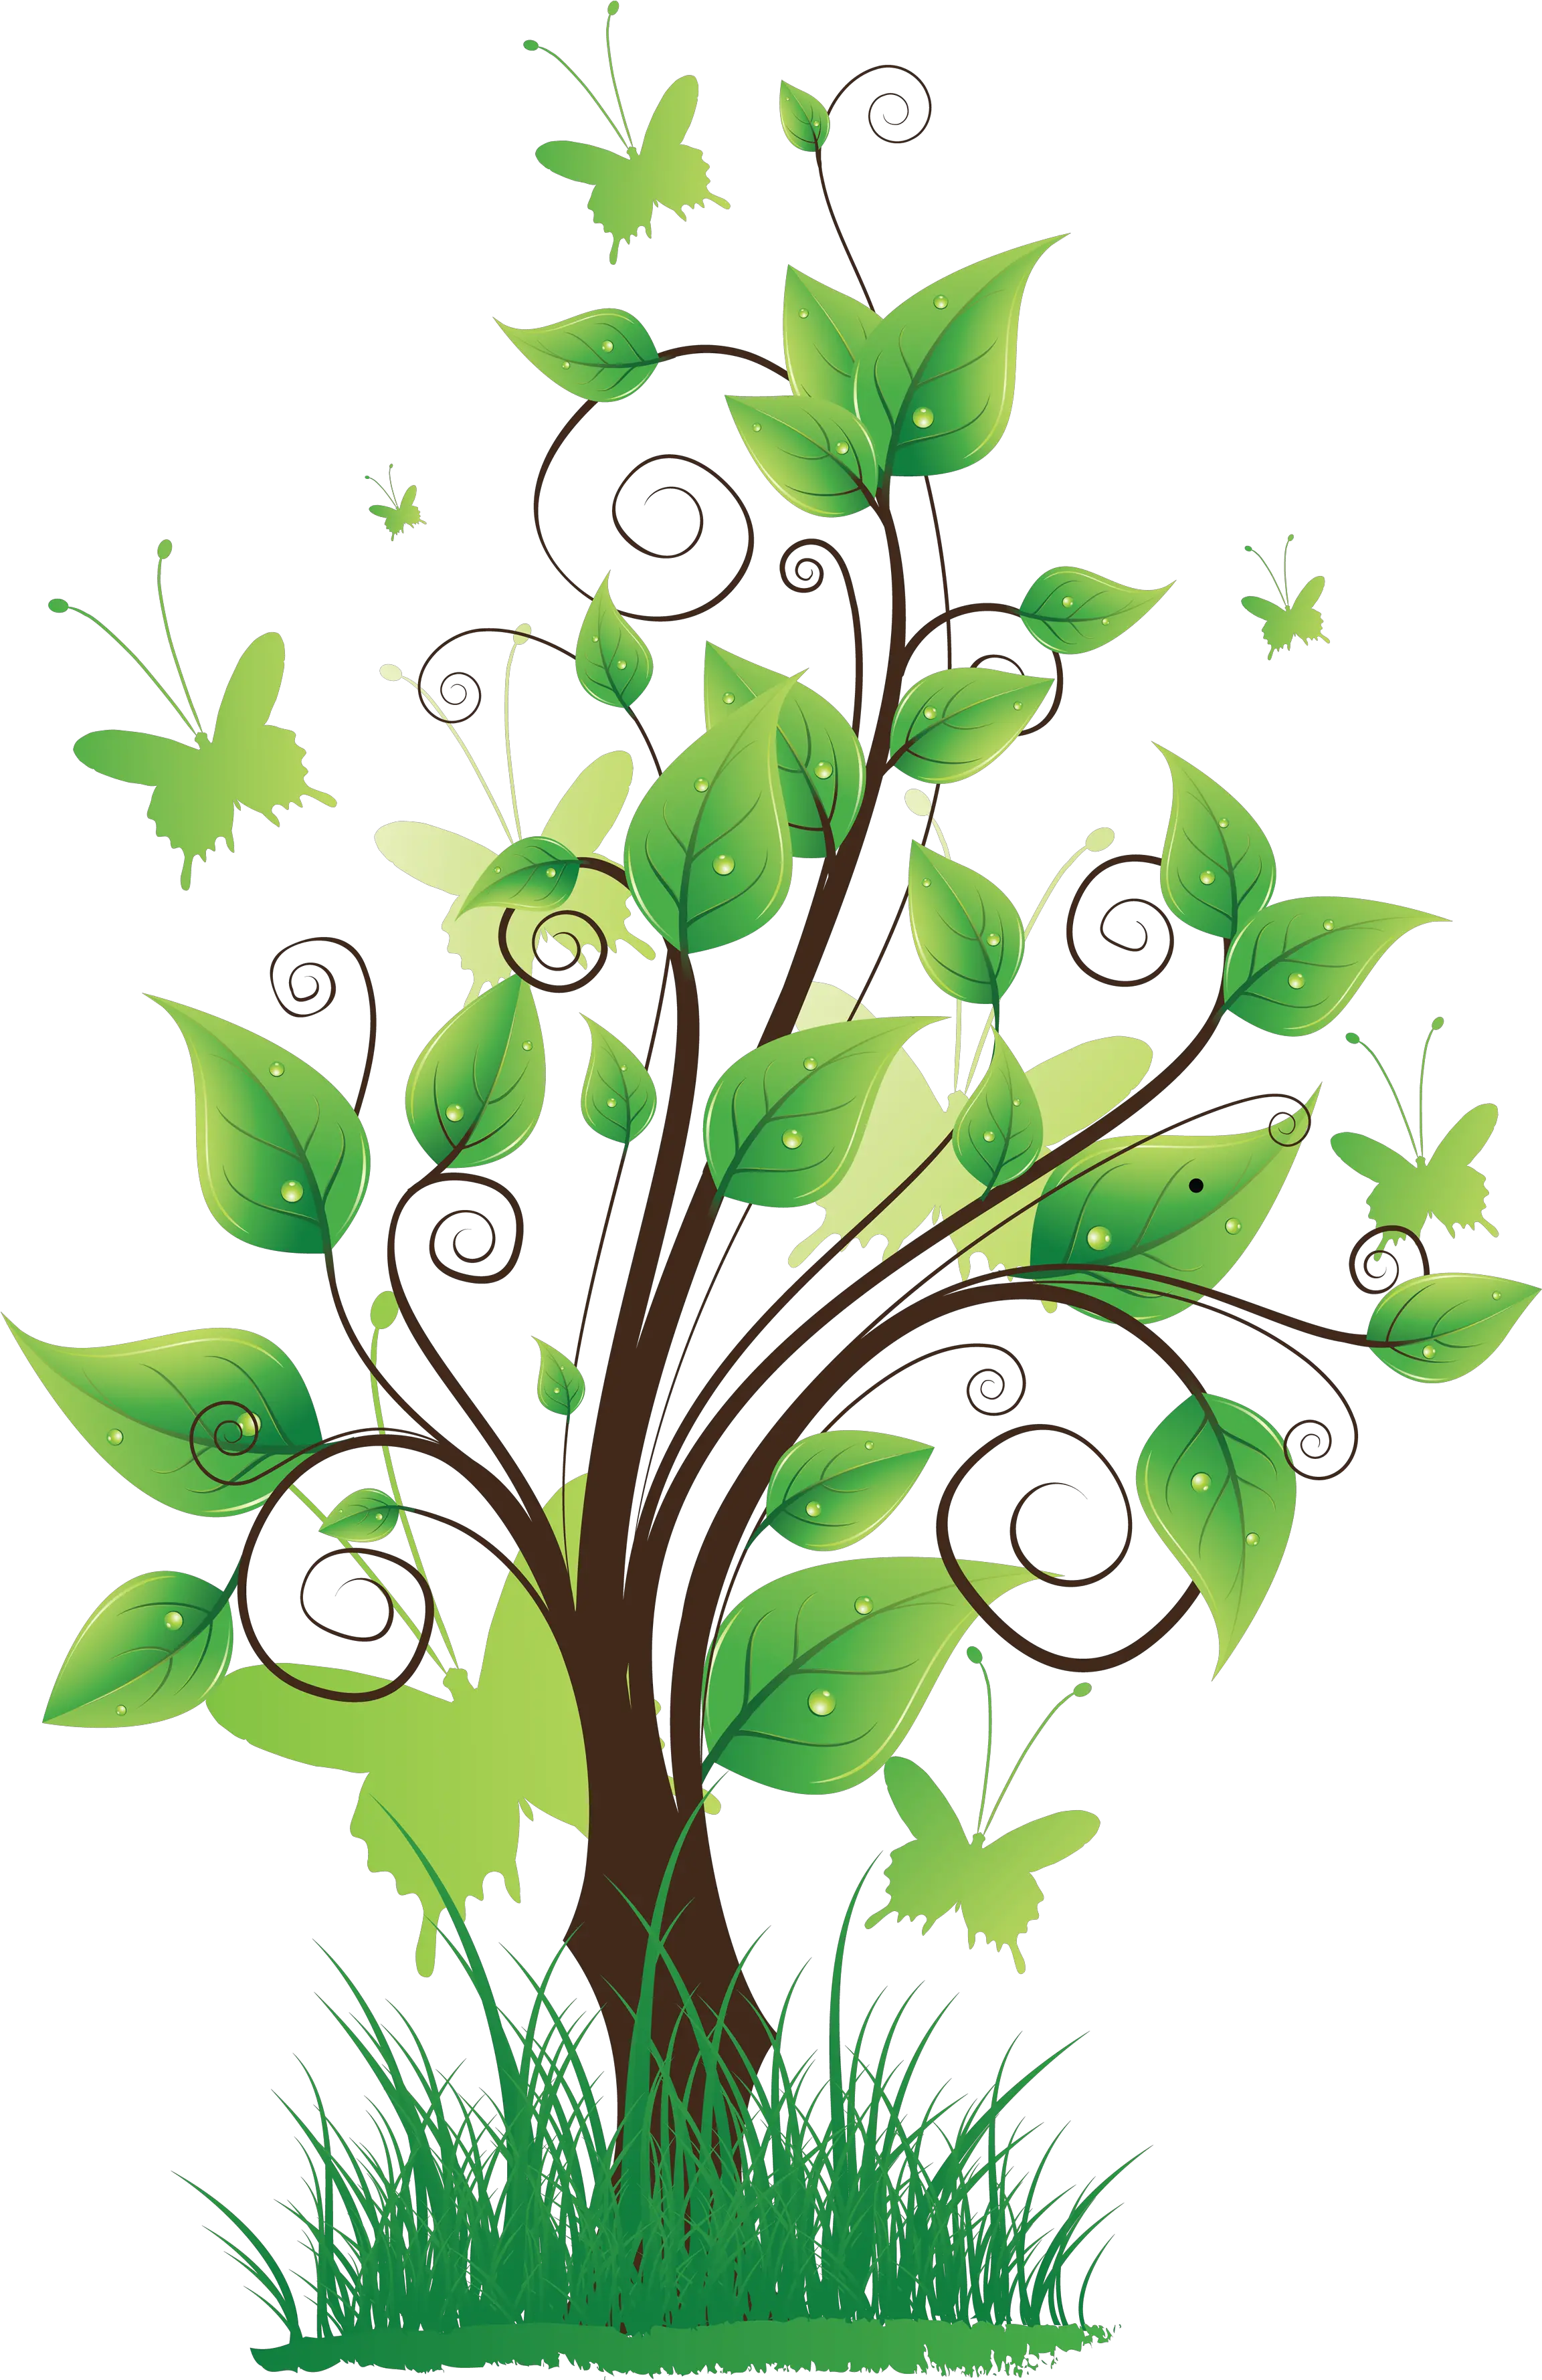 40 Tree Png Images Are Free To Download Nature Tree Background Design Nature Png